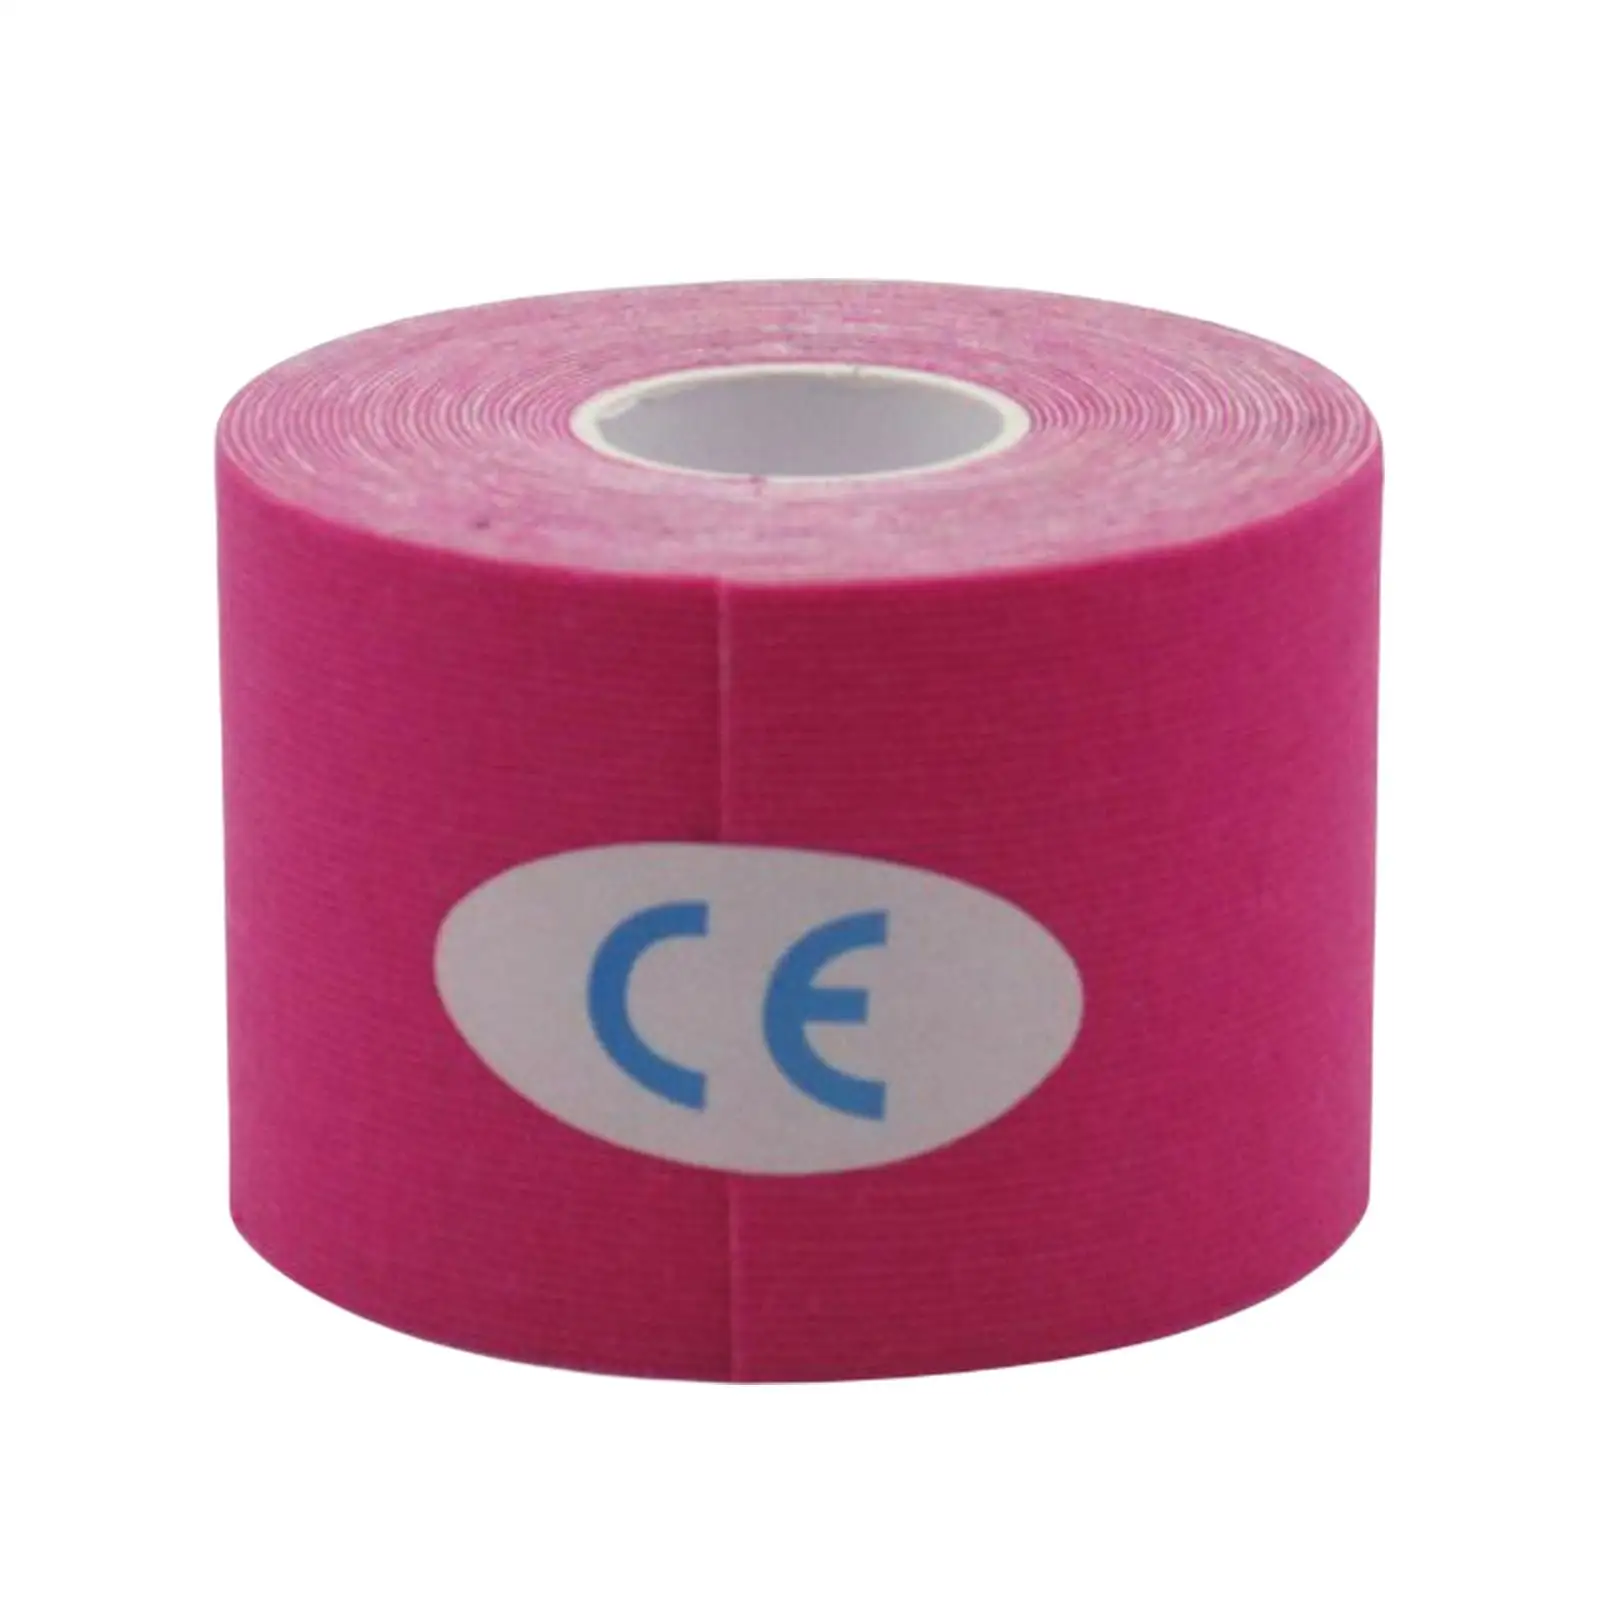 5Cmx5M Tape for Sports Muscle Tape Lifting Tape Water Resistant Breathable Protective Tape for Body Swimming Running Tennis